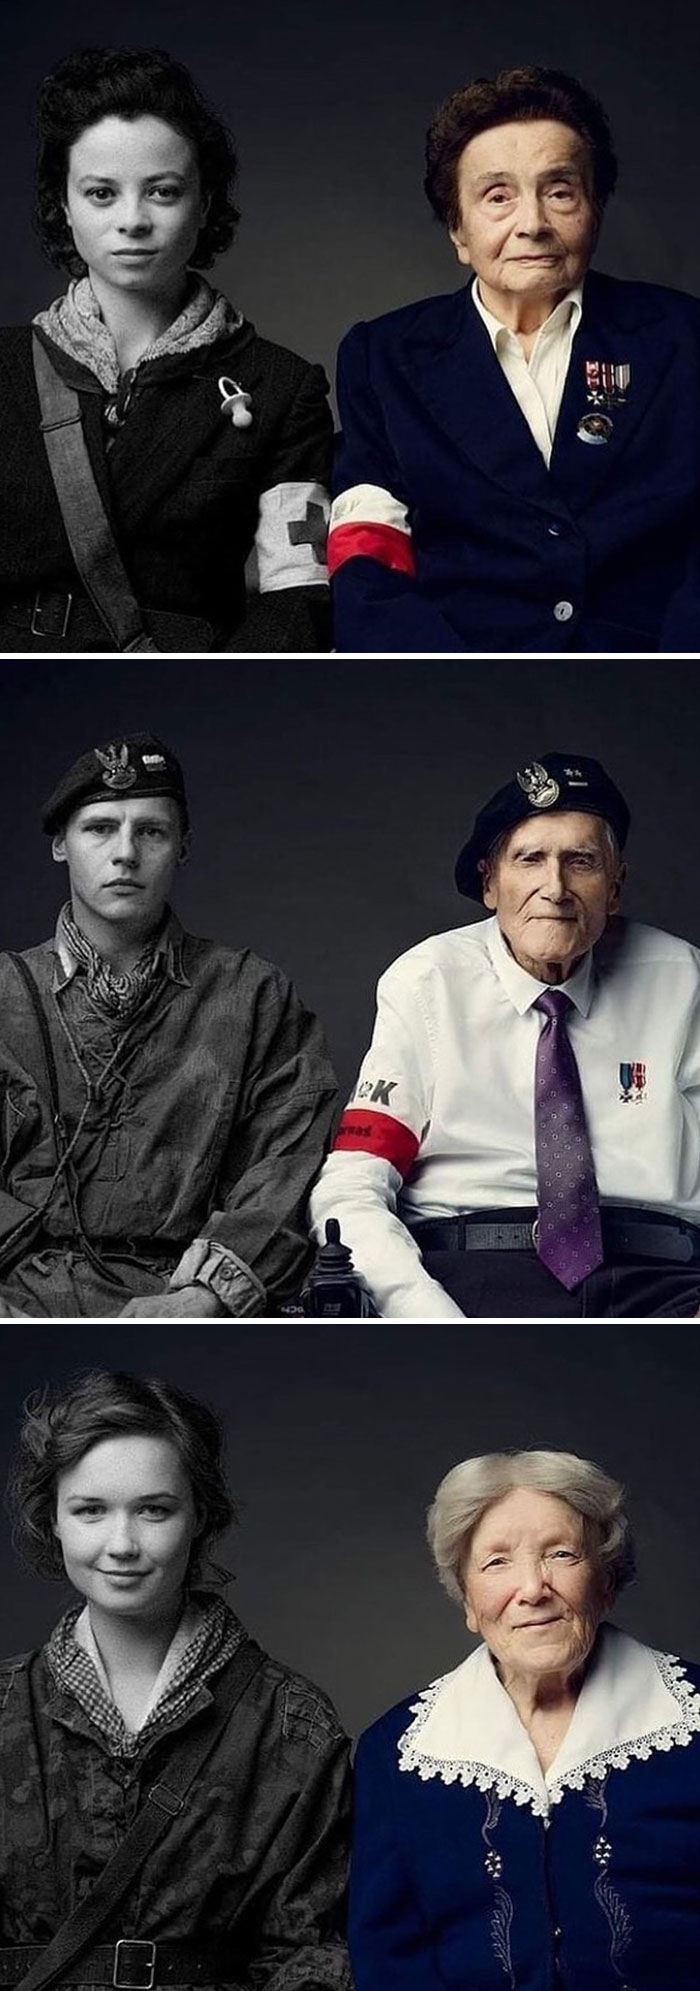 Polish Resistance Veterans Of The Warsaw Uprising (1944), Pictures Then And Now